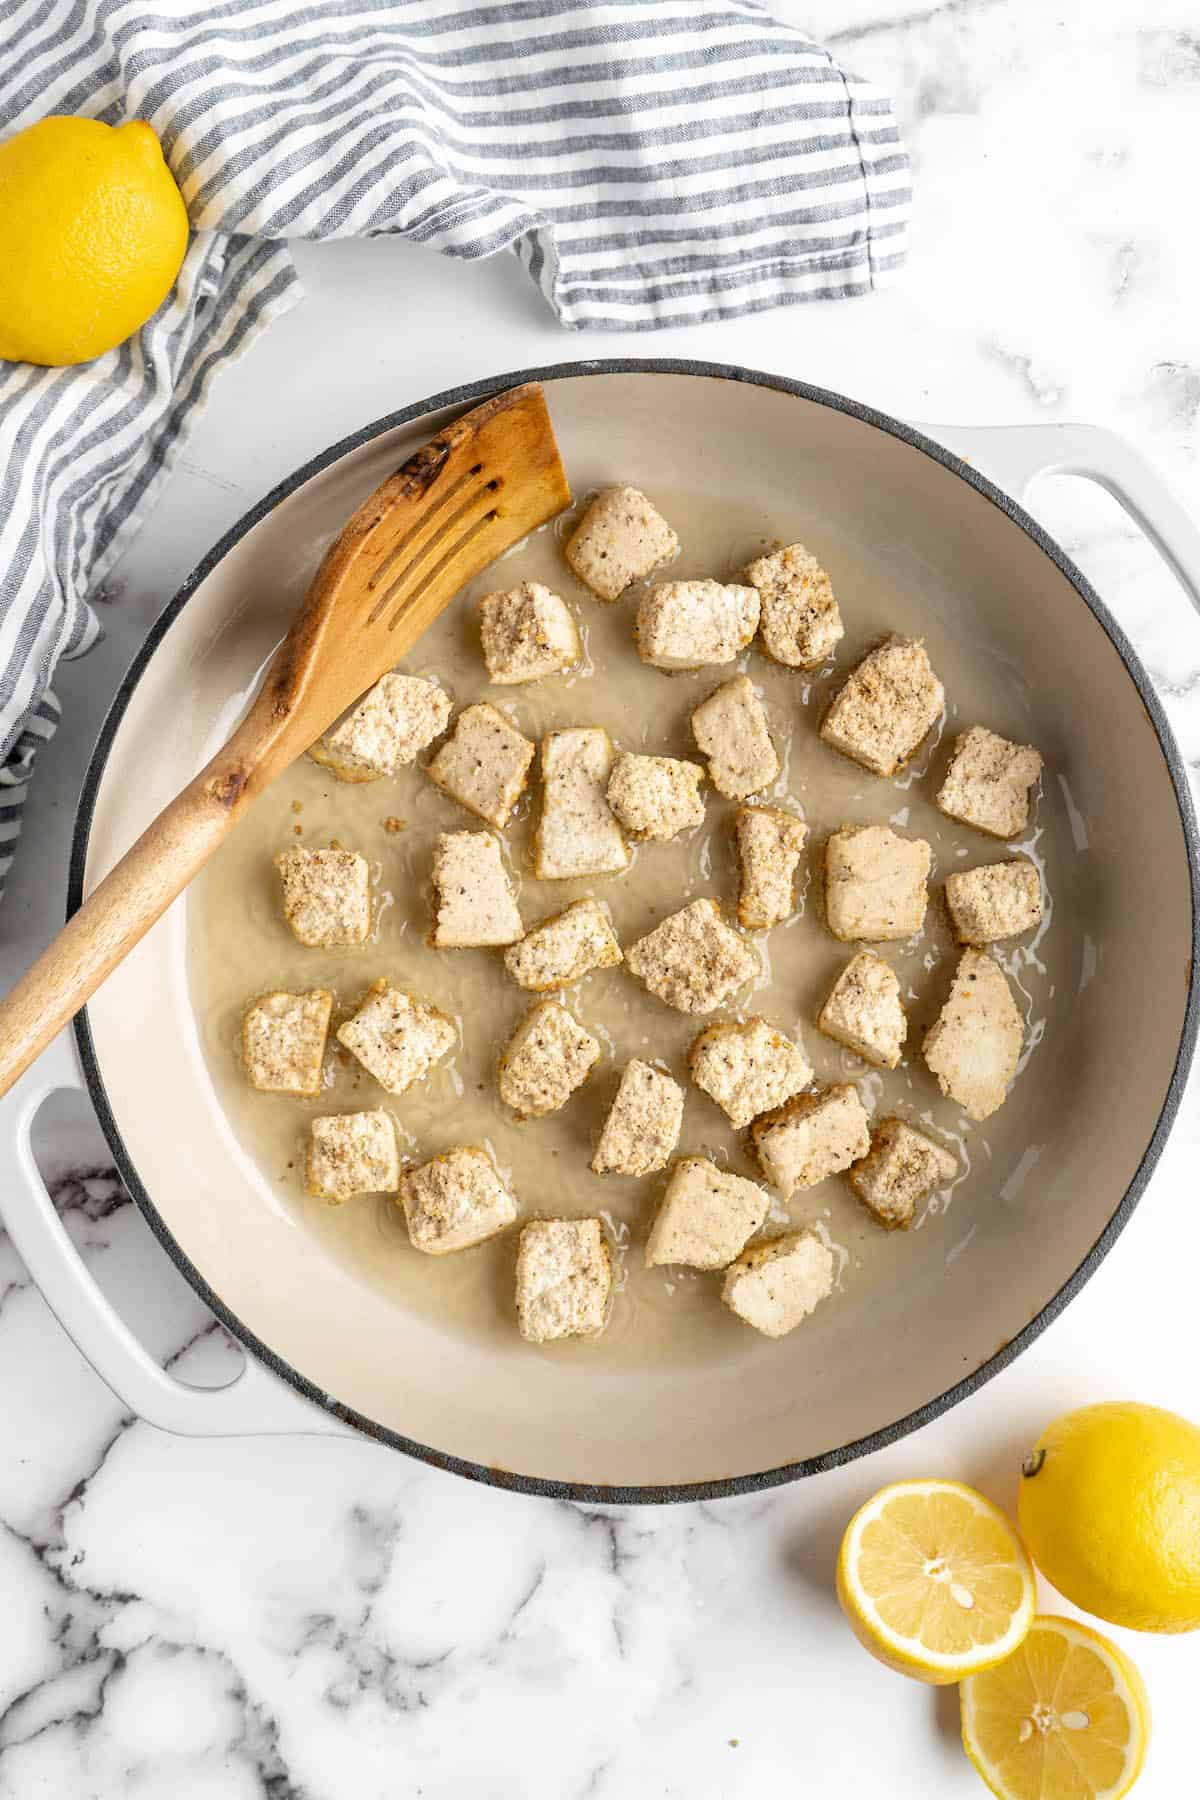 Overhead view of tofu and oil in skillet